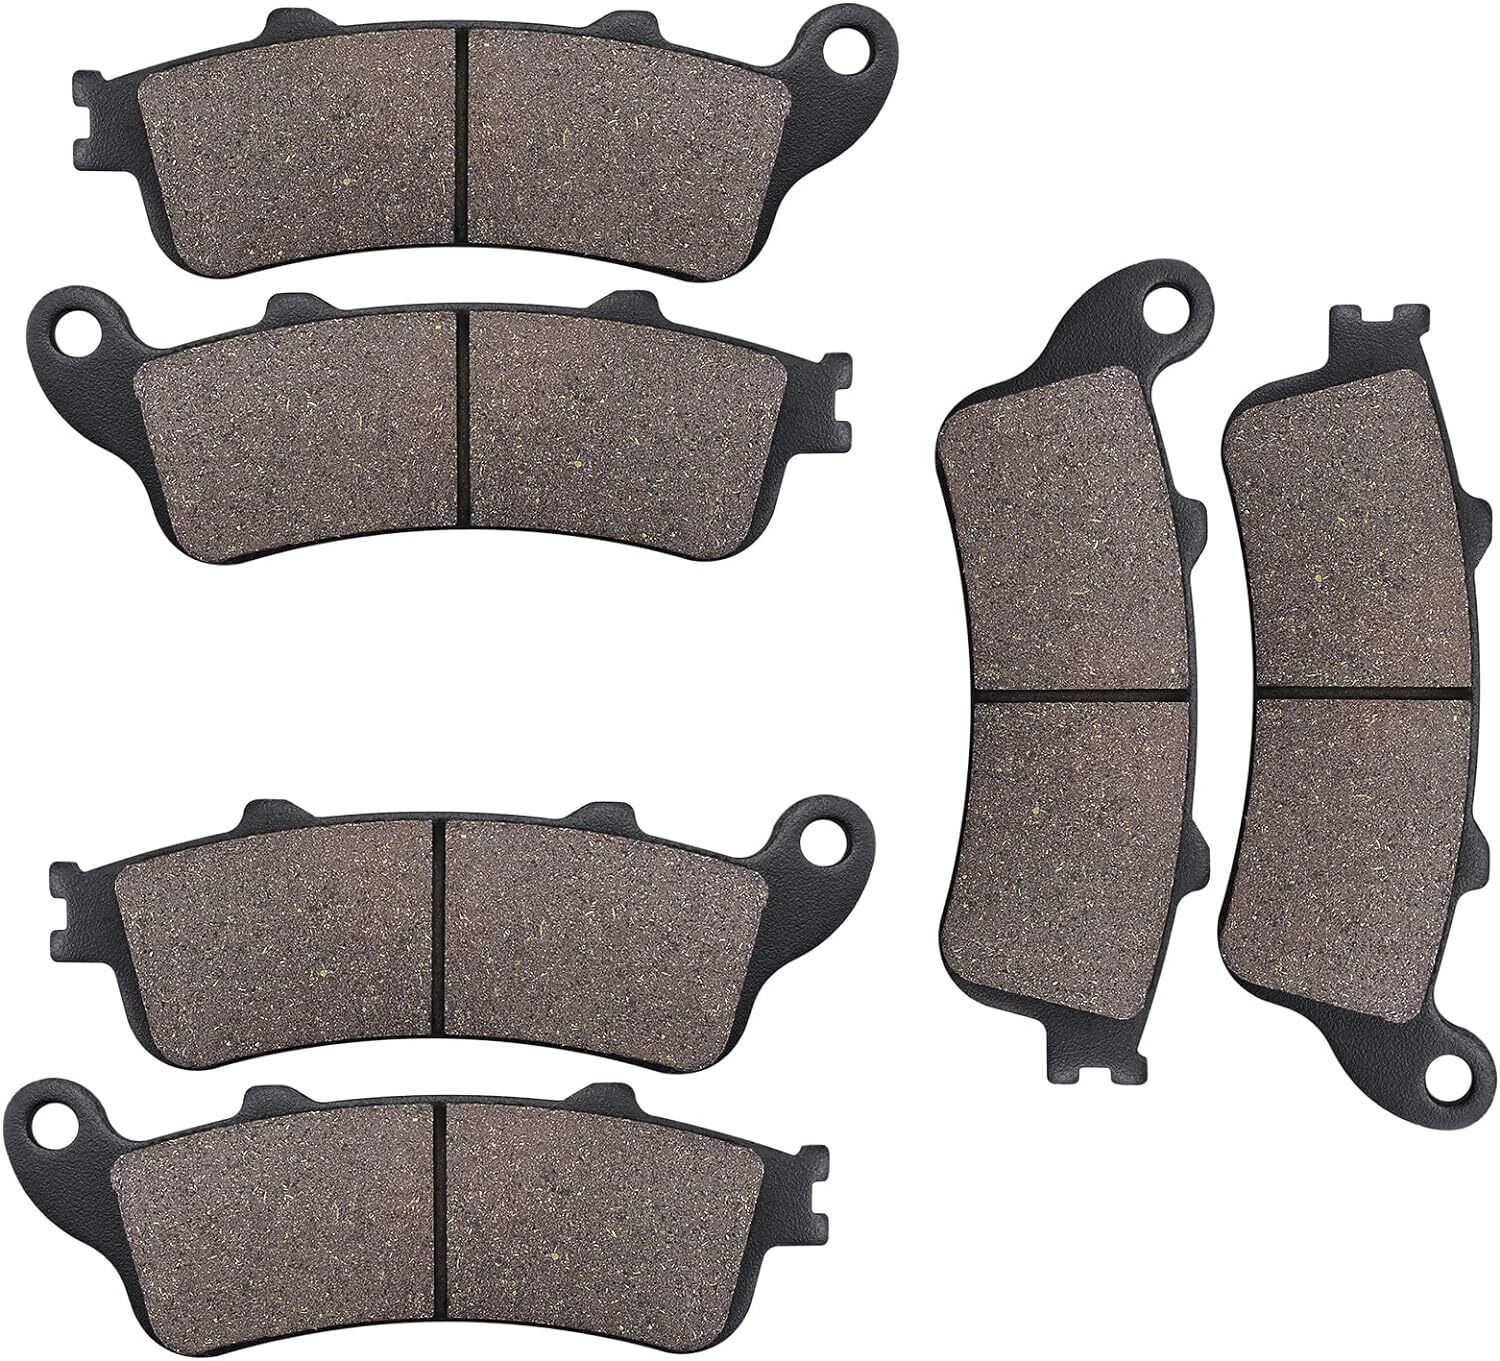 Front and rear Brake Pads Compatible for honda VTX1800 All models 2002-2013